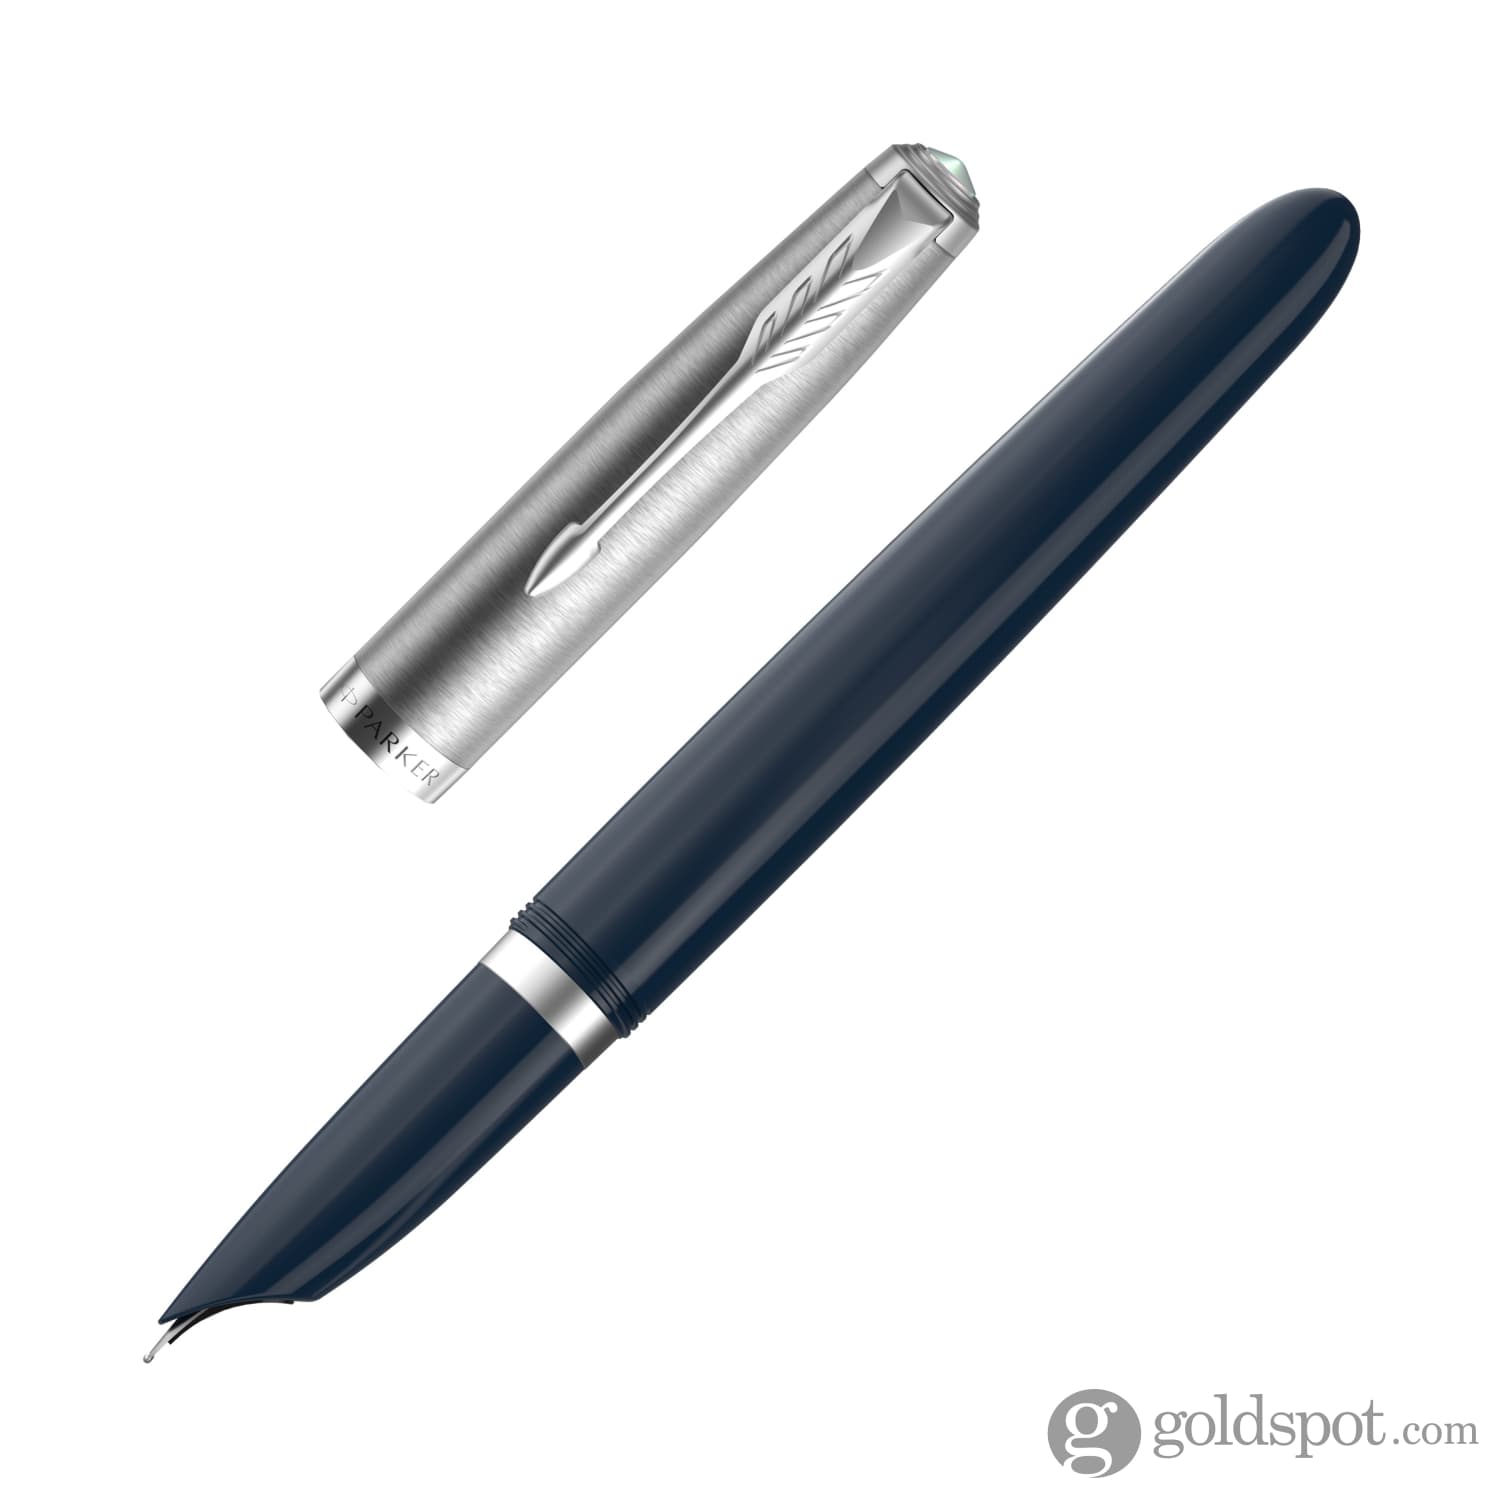 Parker 51 Fountain Pen in Midnight Blue with Chrome Trim